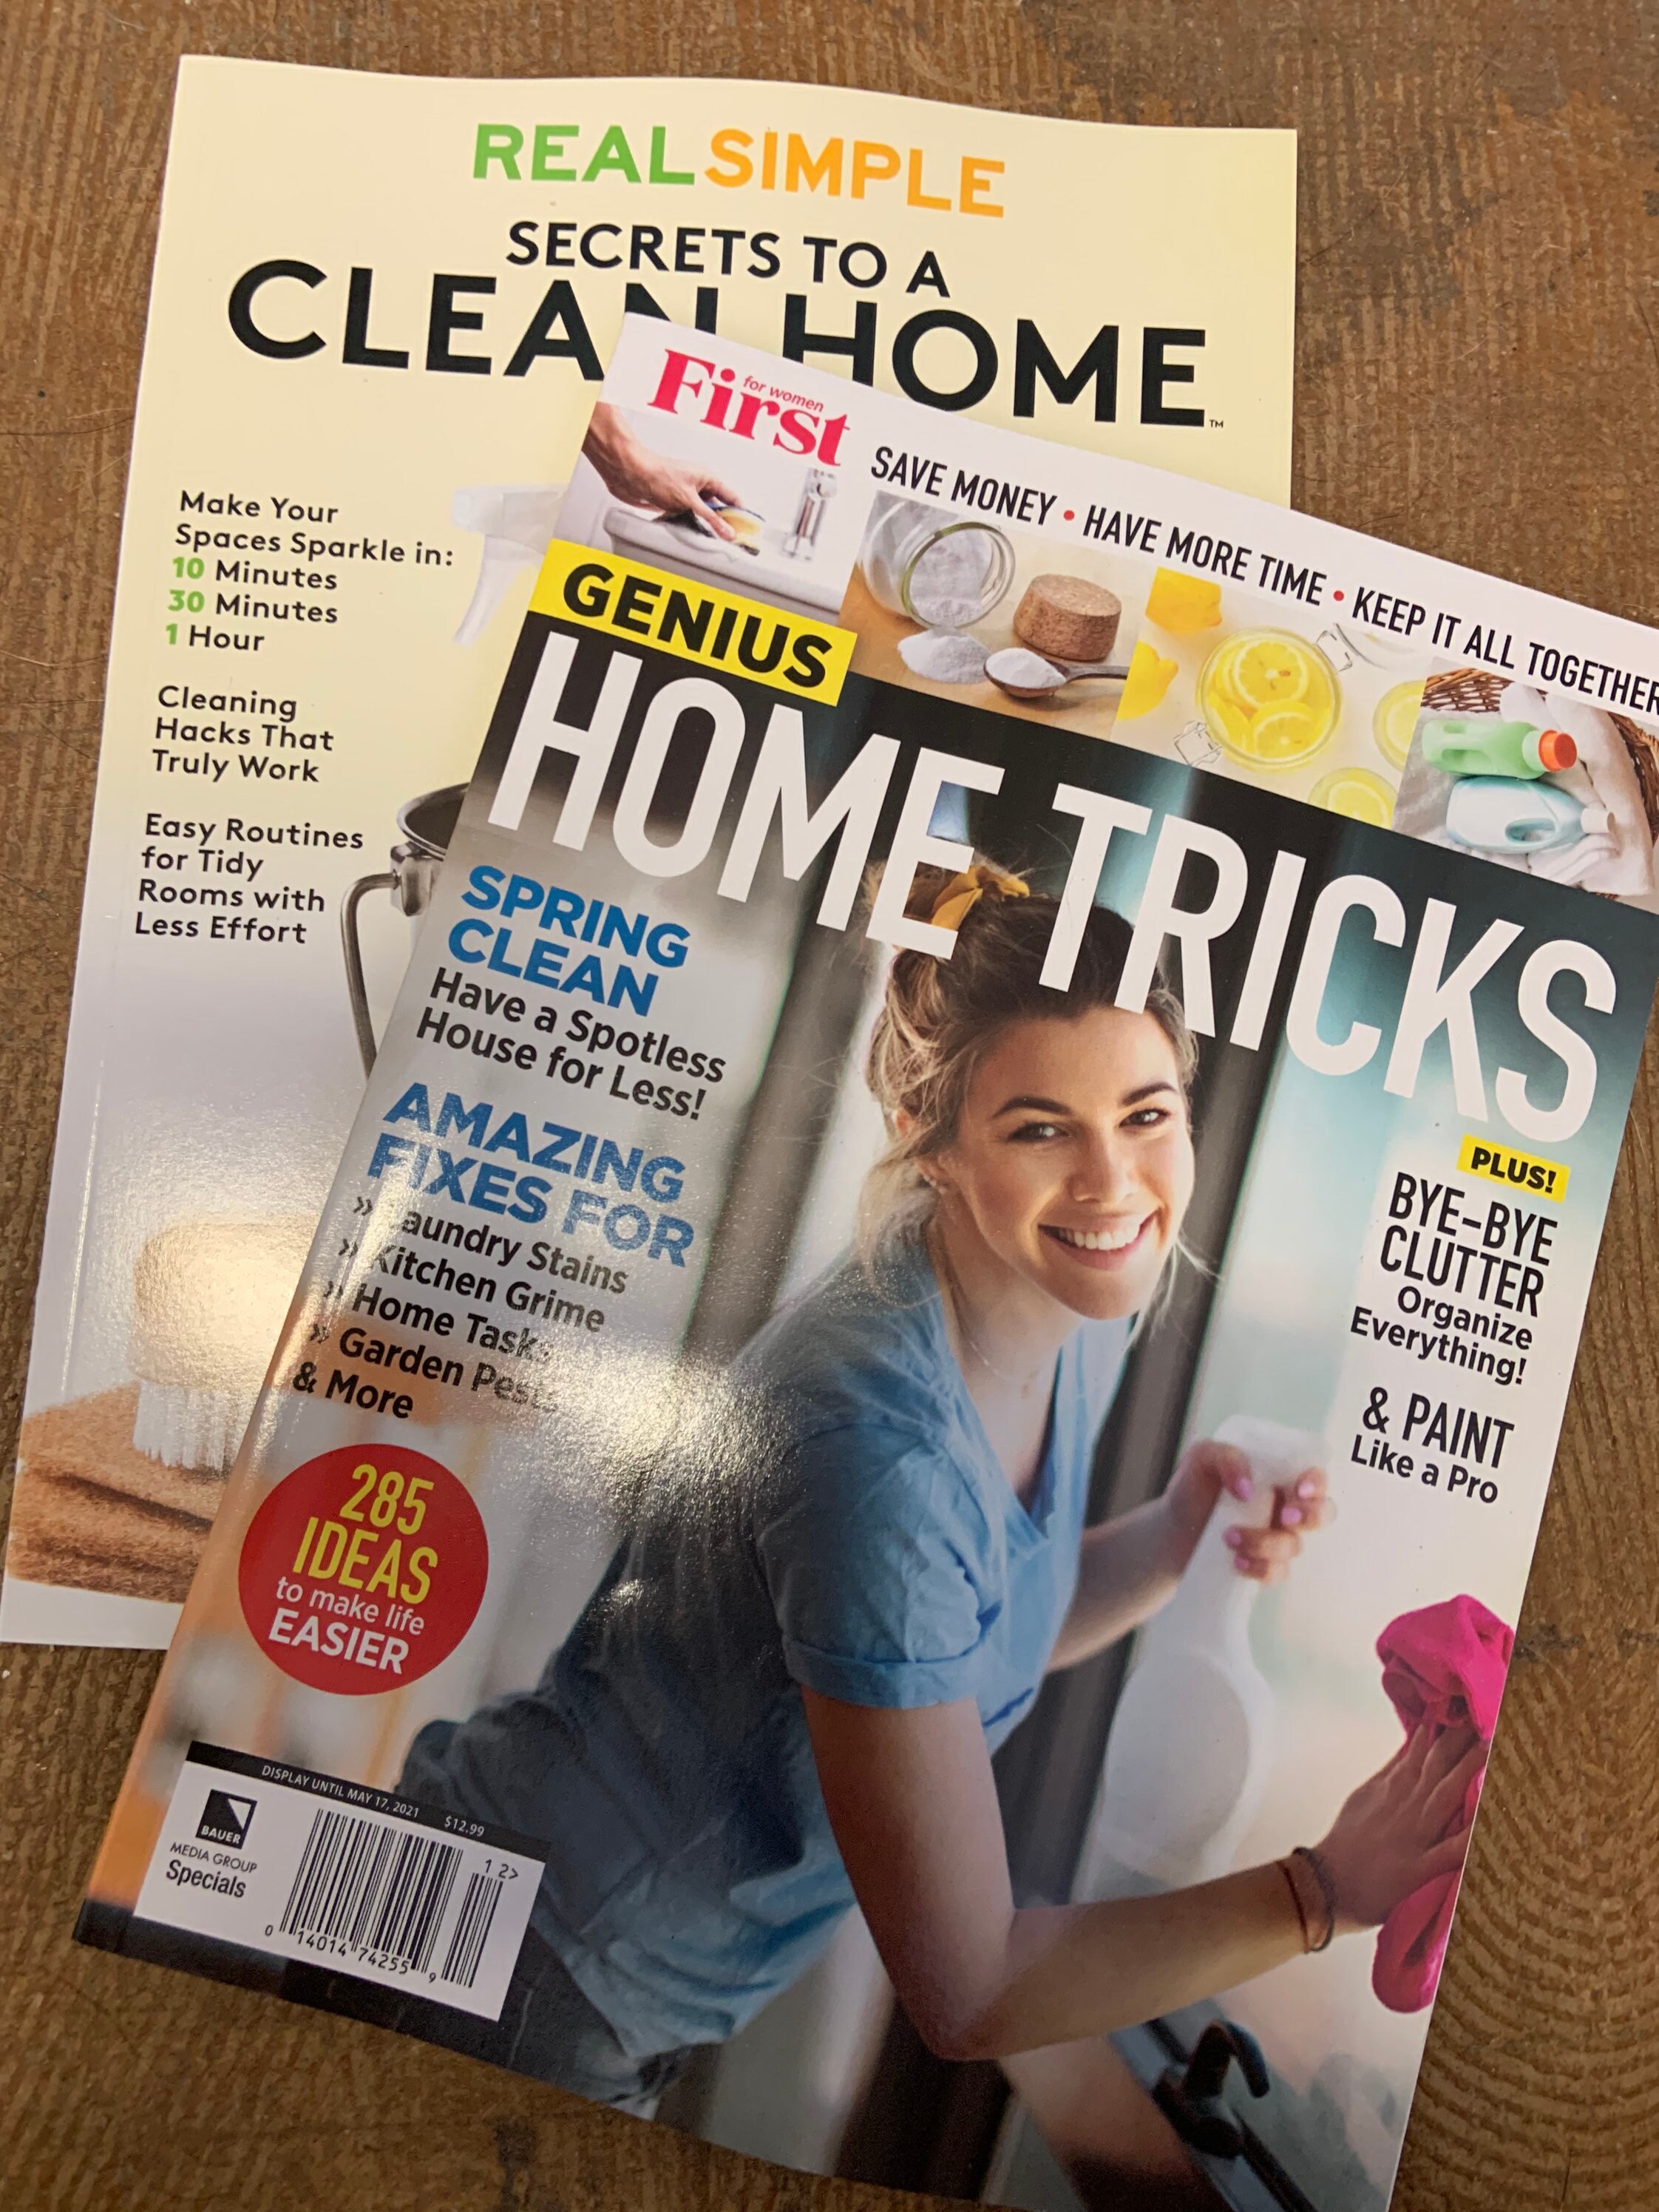  Real  Simple  Secrets to a Clean Home First for Woman Genius 